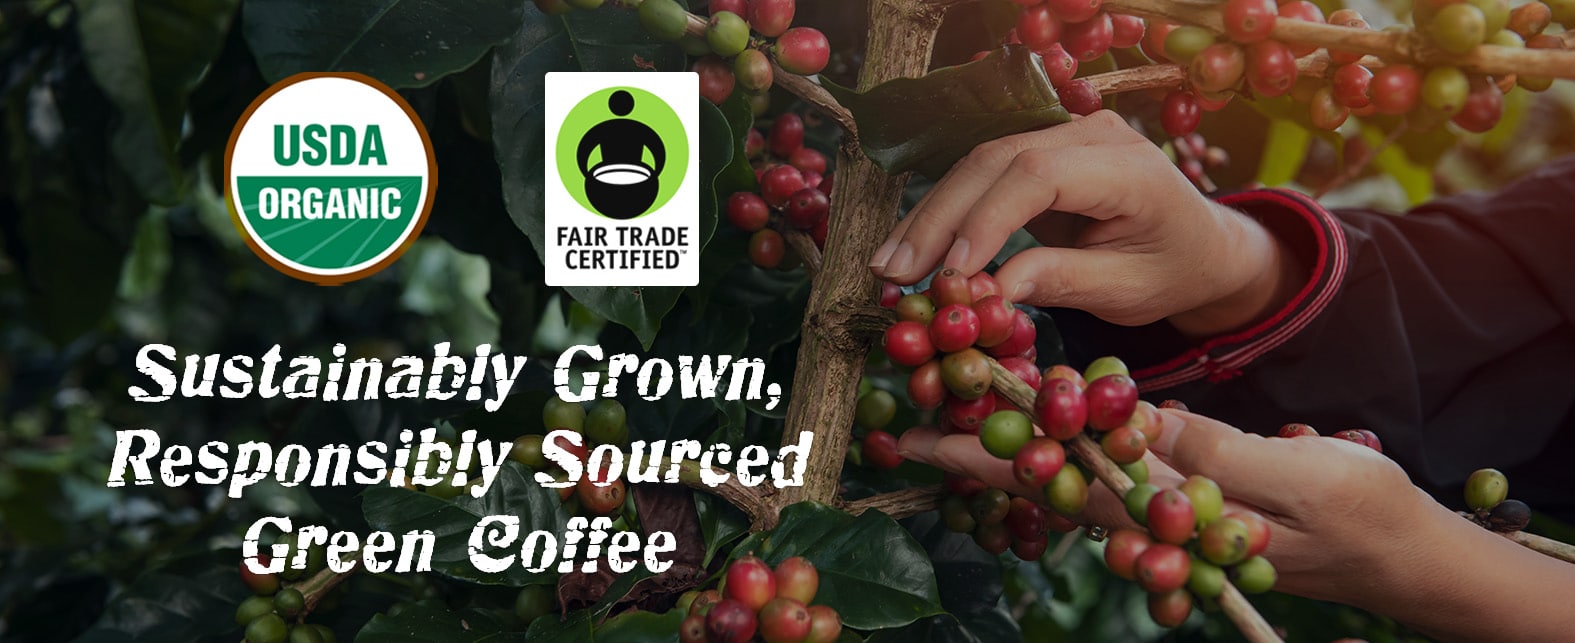 Sustainably Grown Responsibly Sourced Green Coffee by Small Craft Island Coffee, Topsail Island, NC